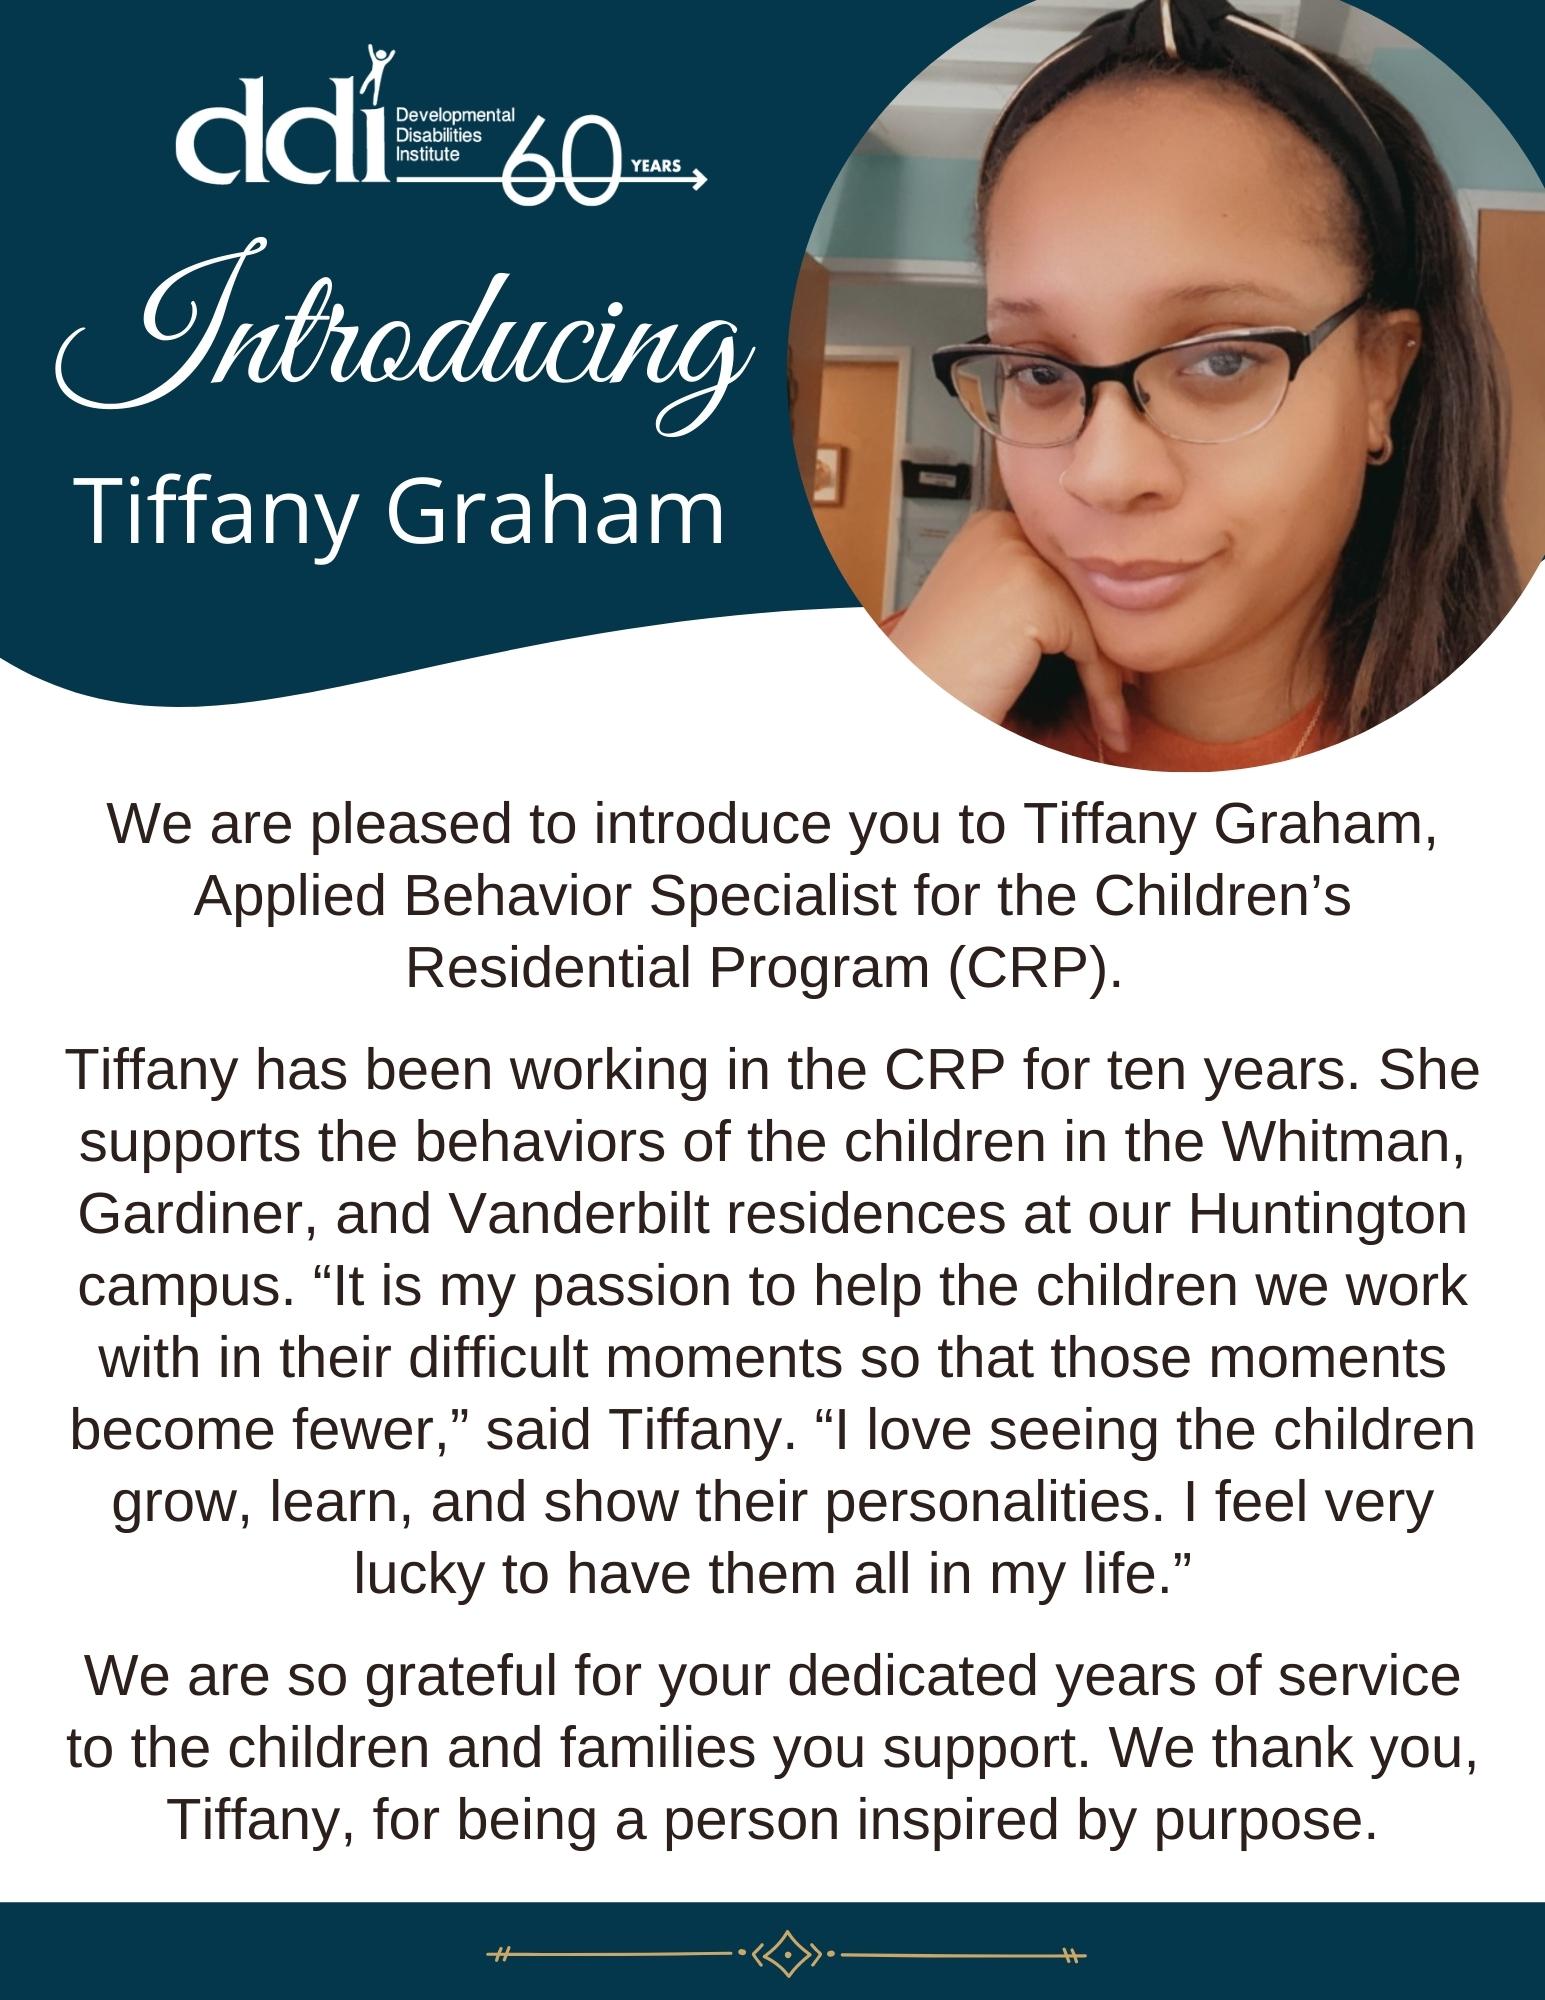 Introducing Tiffany Graham from the CRP